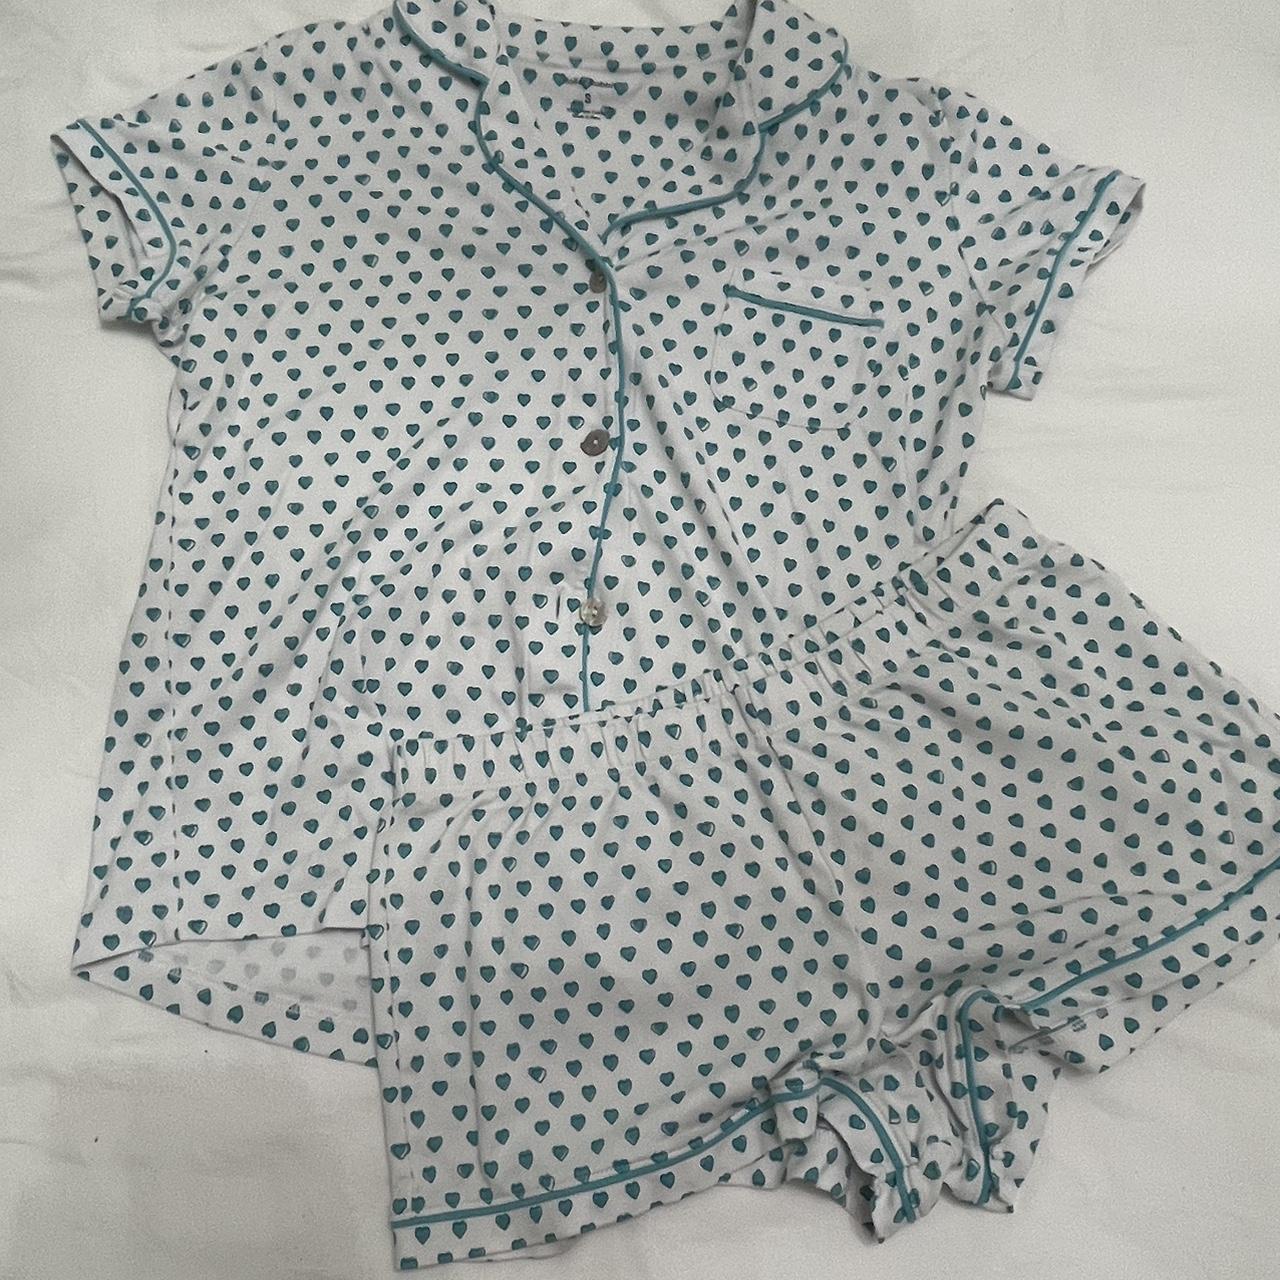 Roller Rabbit mint blue pajamas! I NEED THIS GONE SO... - Depop